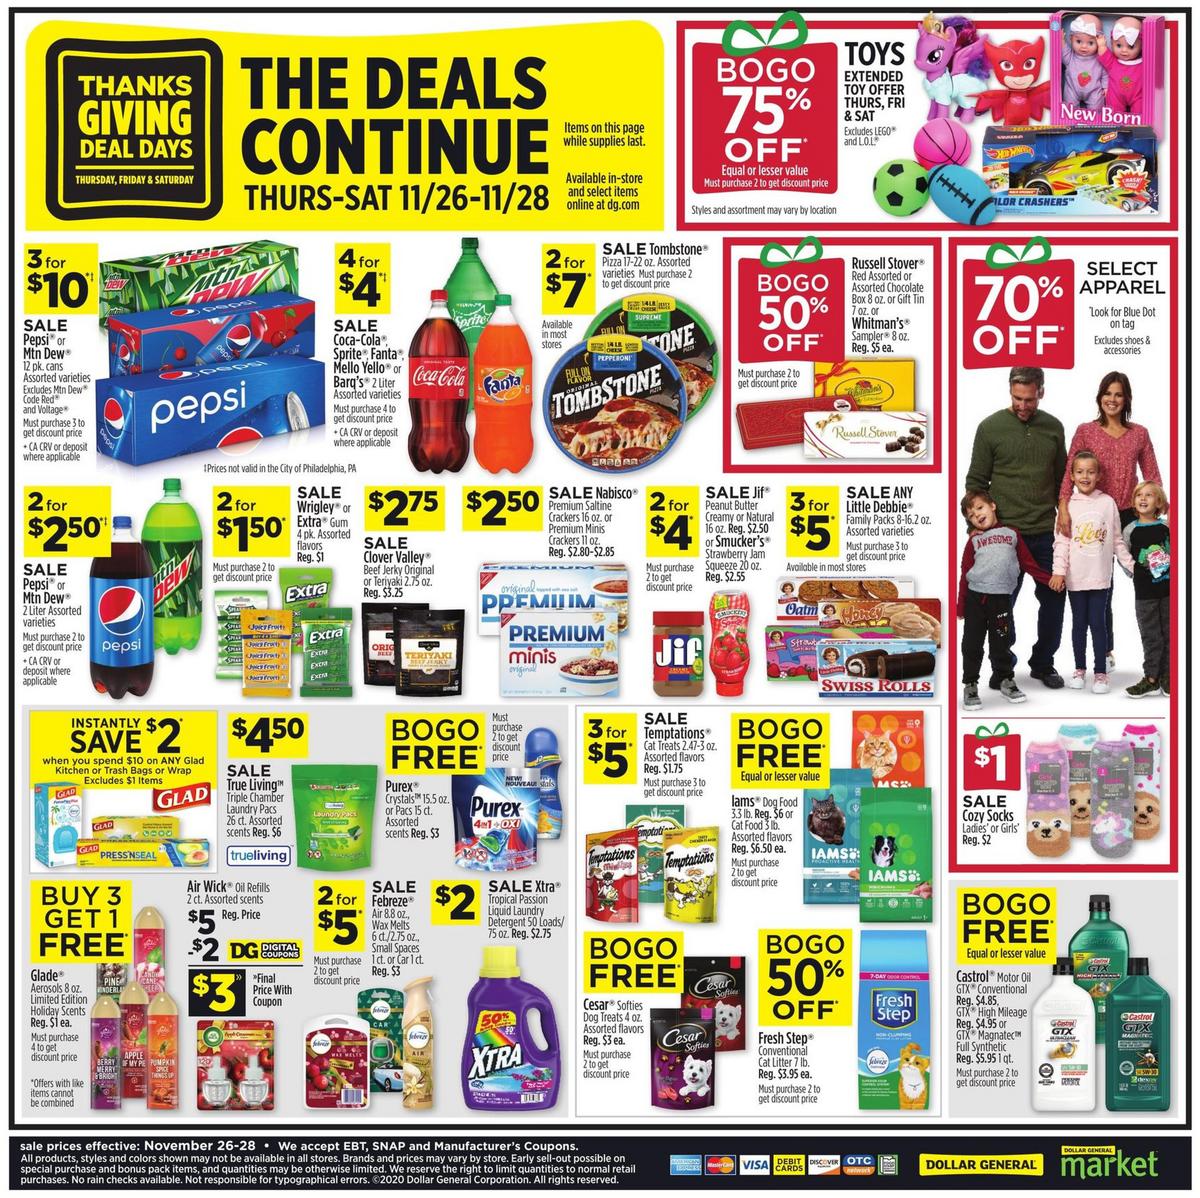 Dollar General Save Big with 3 Day Deals! Weekly Ad from November 26